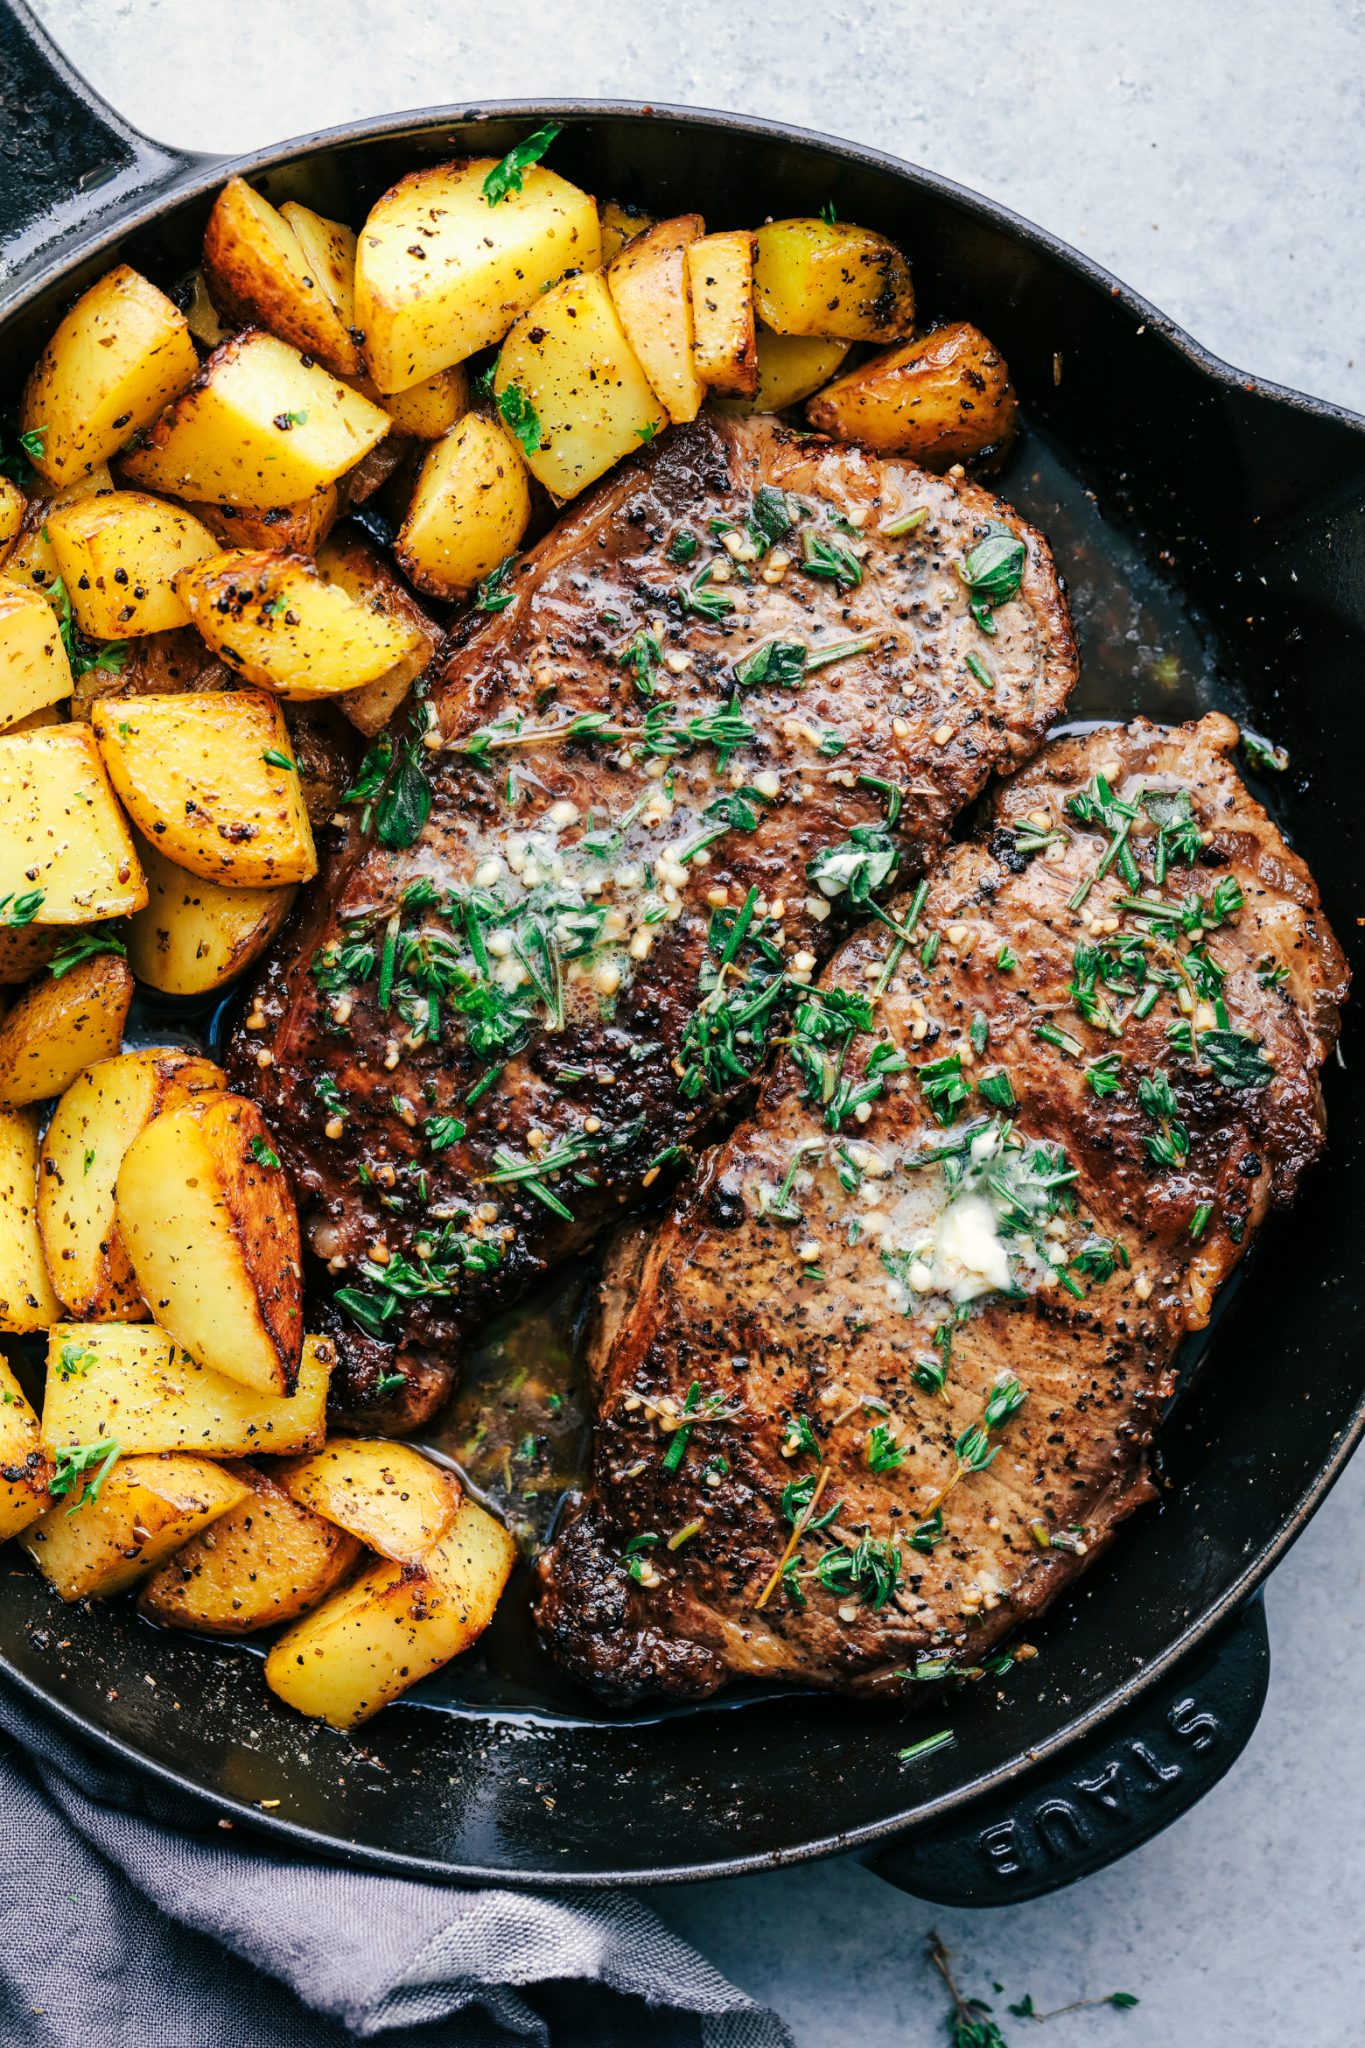 Skillet Garlic Butter Herb Steak and Potatoes | The Recipe Critic